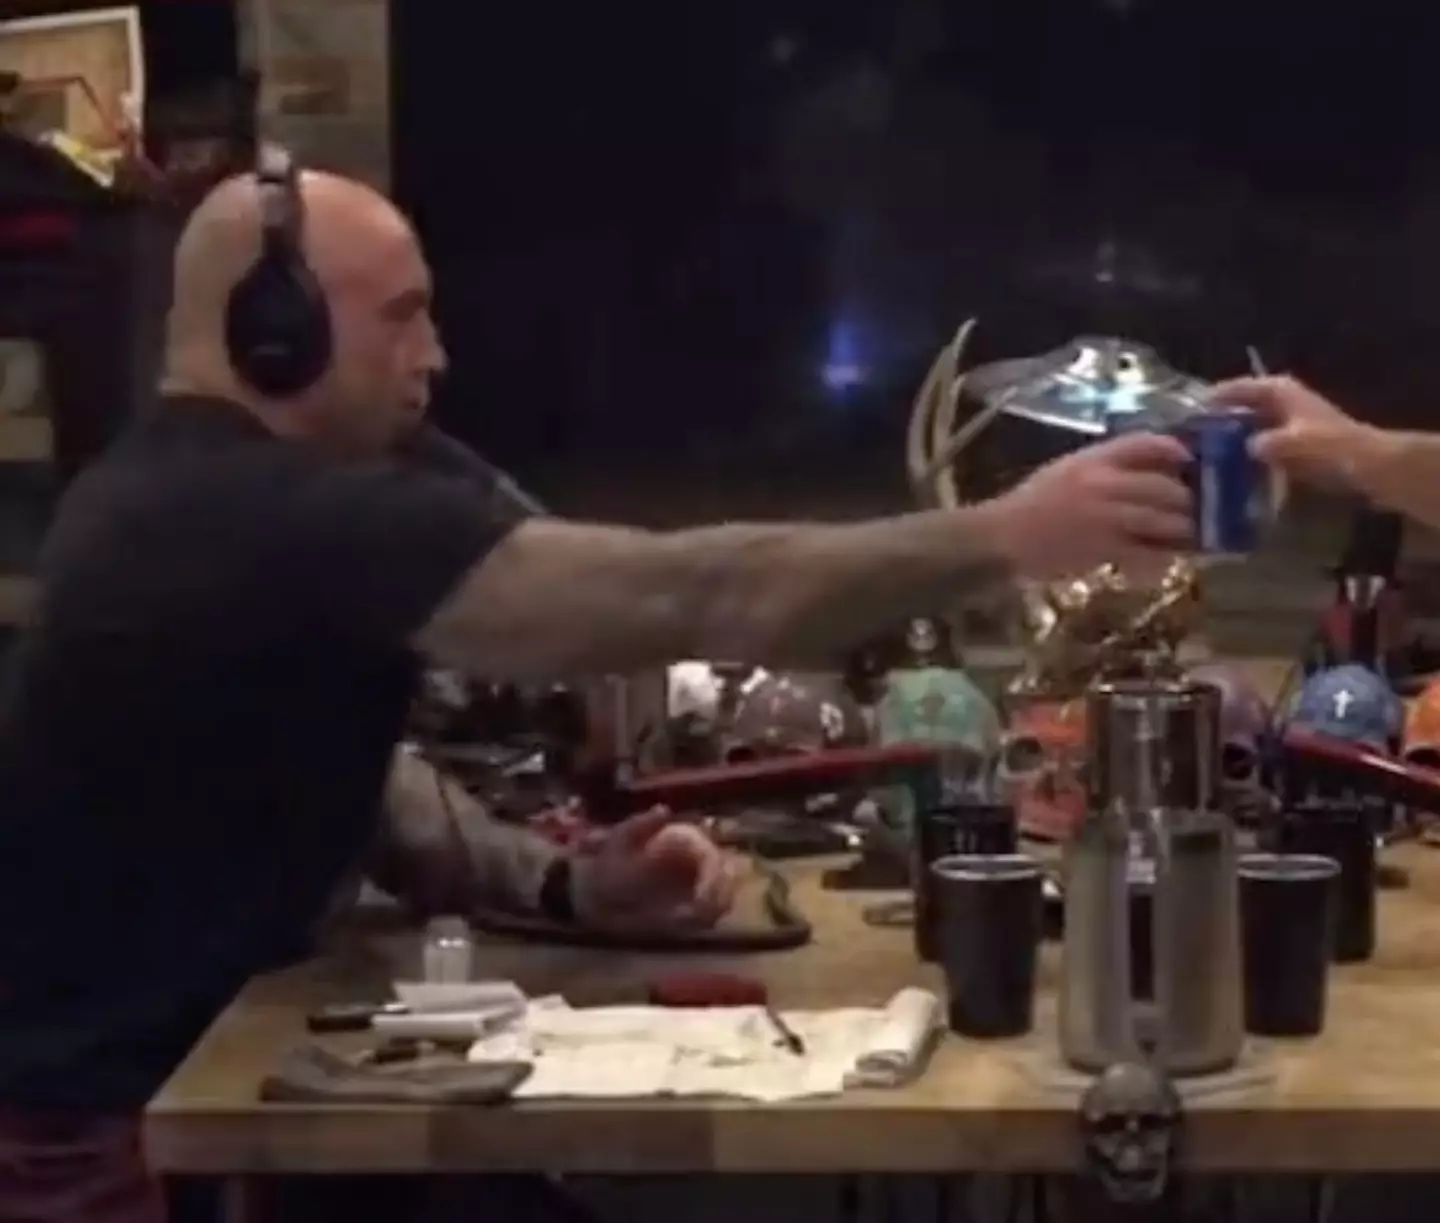 Joe Rogan and his guest cracked open a couple of cans of Bud Light.